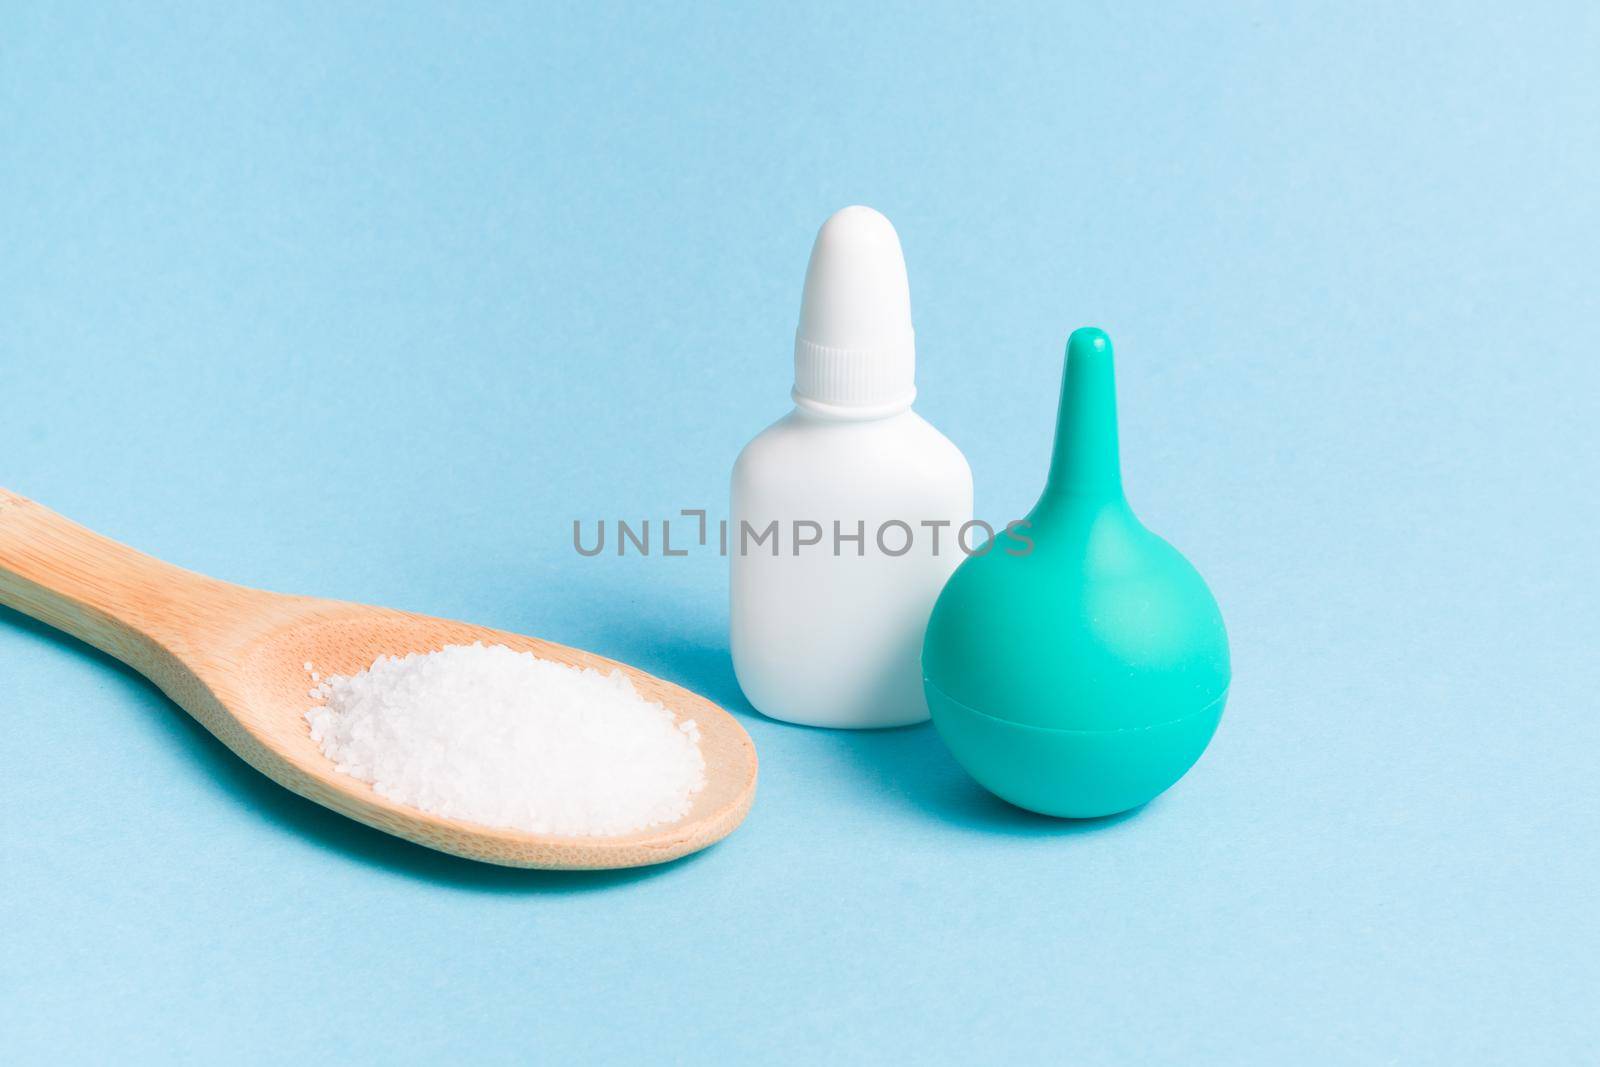 bottle of nose drops, a wooden spoon with sea food salt and a small green rubber enema for washing the nose on a light blue background